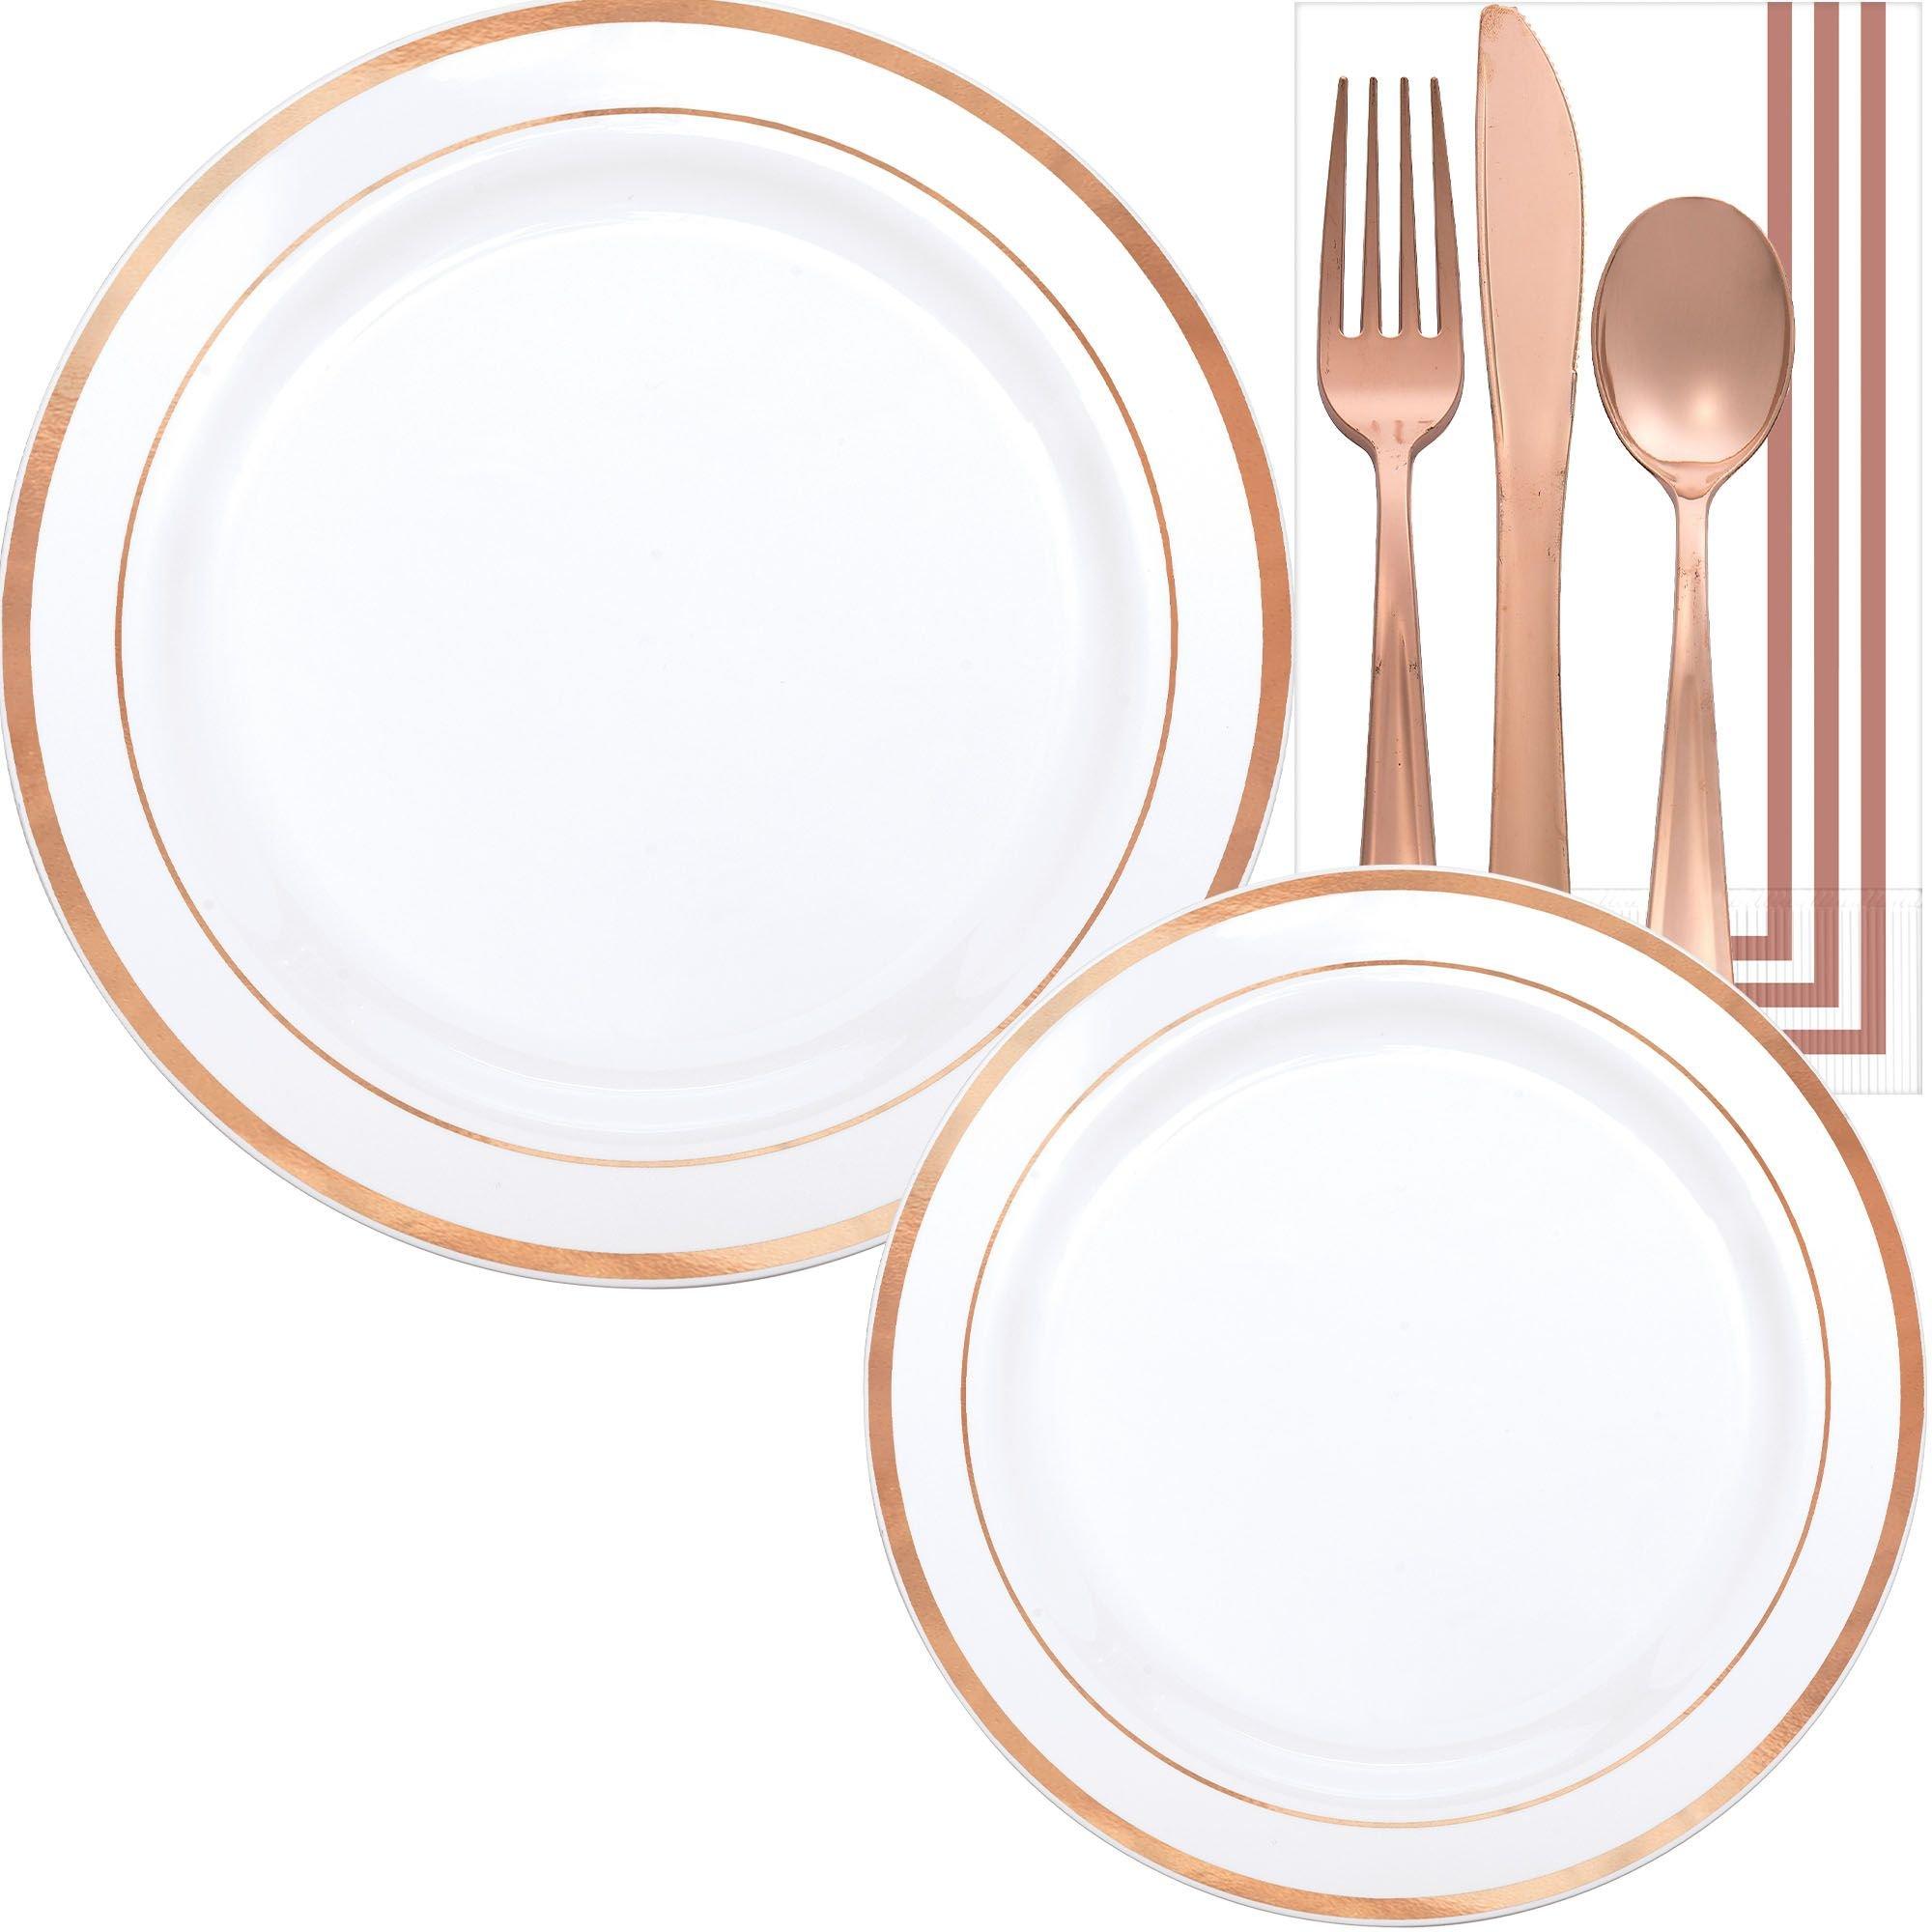 Trimmed White Premium Tableware Kit for 20 Guests